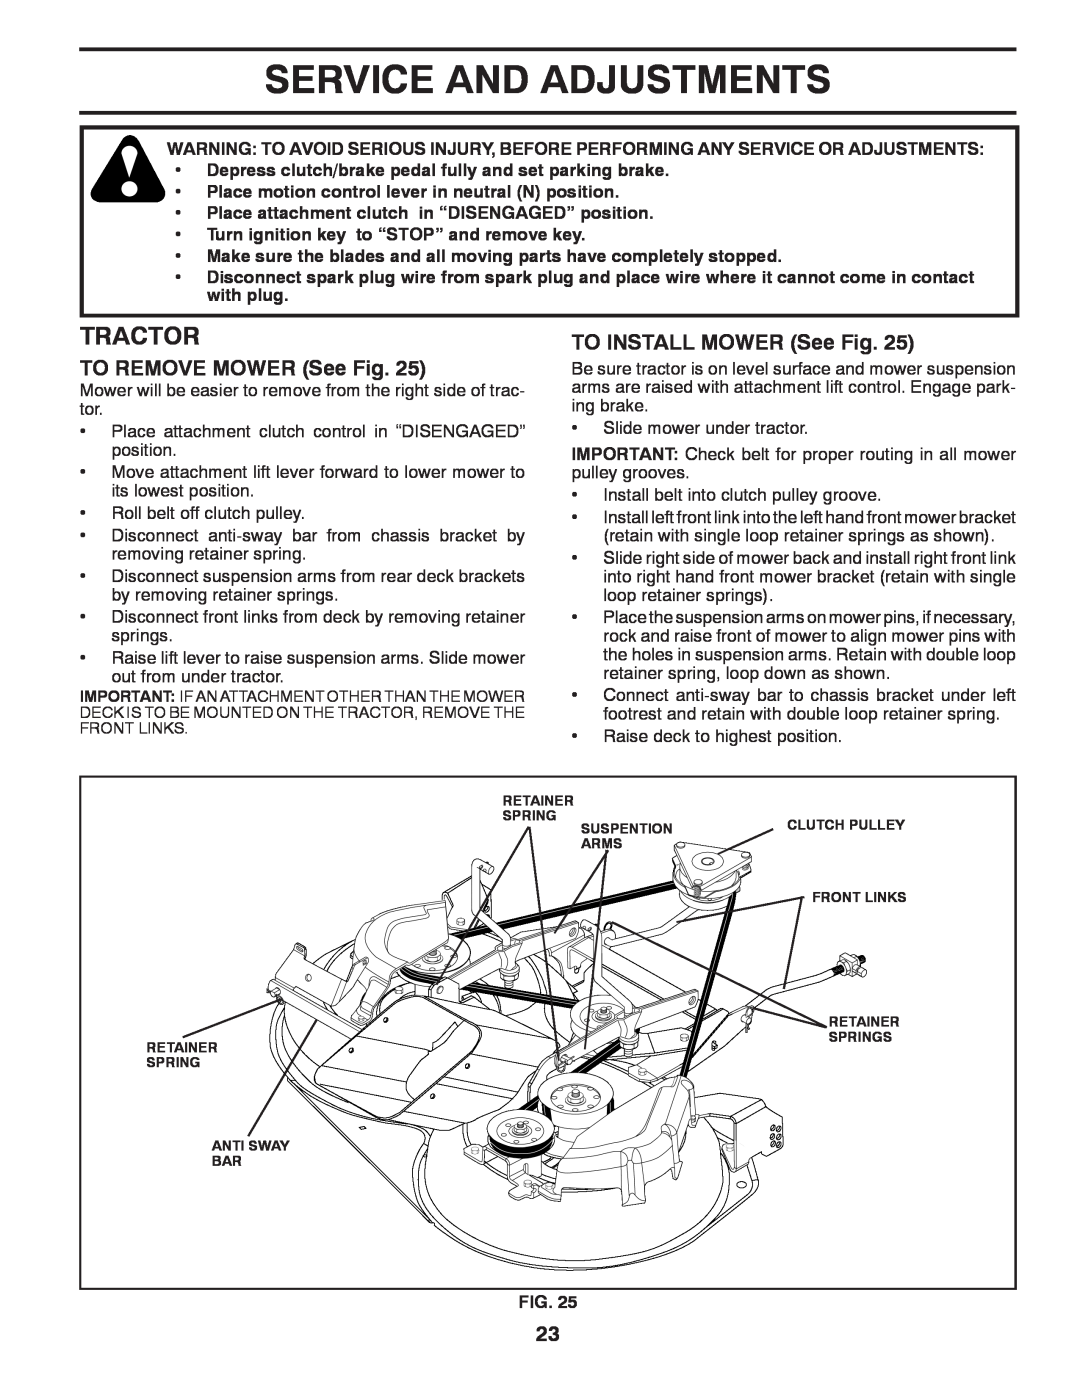 Husqvarna CTH2036 XP owner manual Service And Adjustments, TO REMOVE MOWER See Fig, TO INSTALL MOWER See Fig, Tractor 